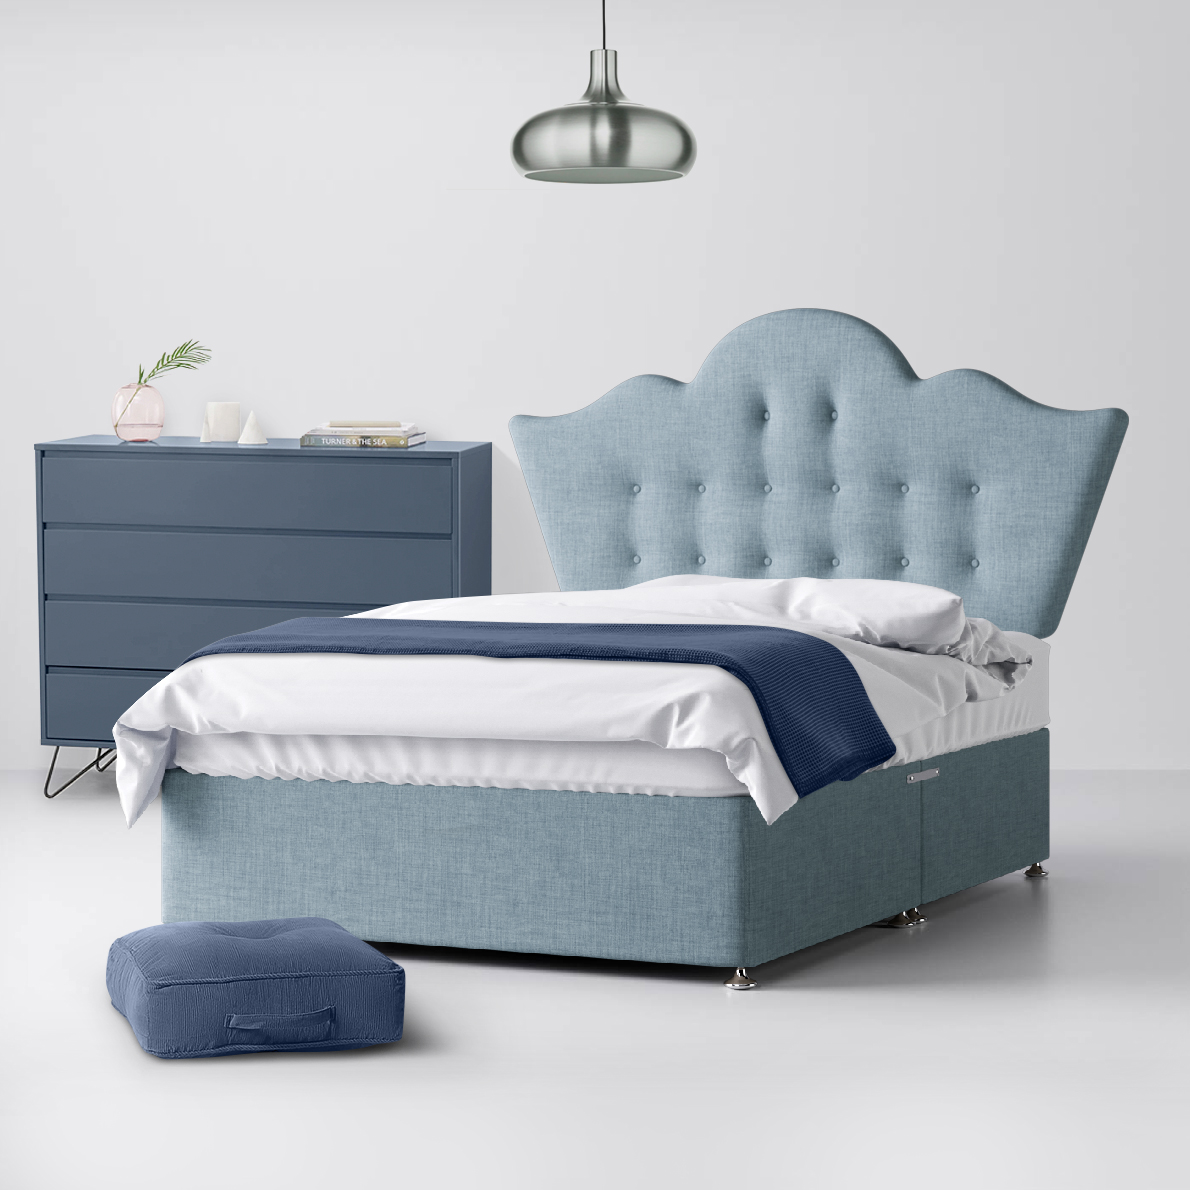 Small Double - Divan Bed and Florence Buttoned Headboard - Duck Egg Blue - Fabric - 4ft - Happy Beds